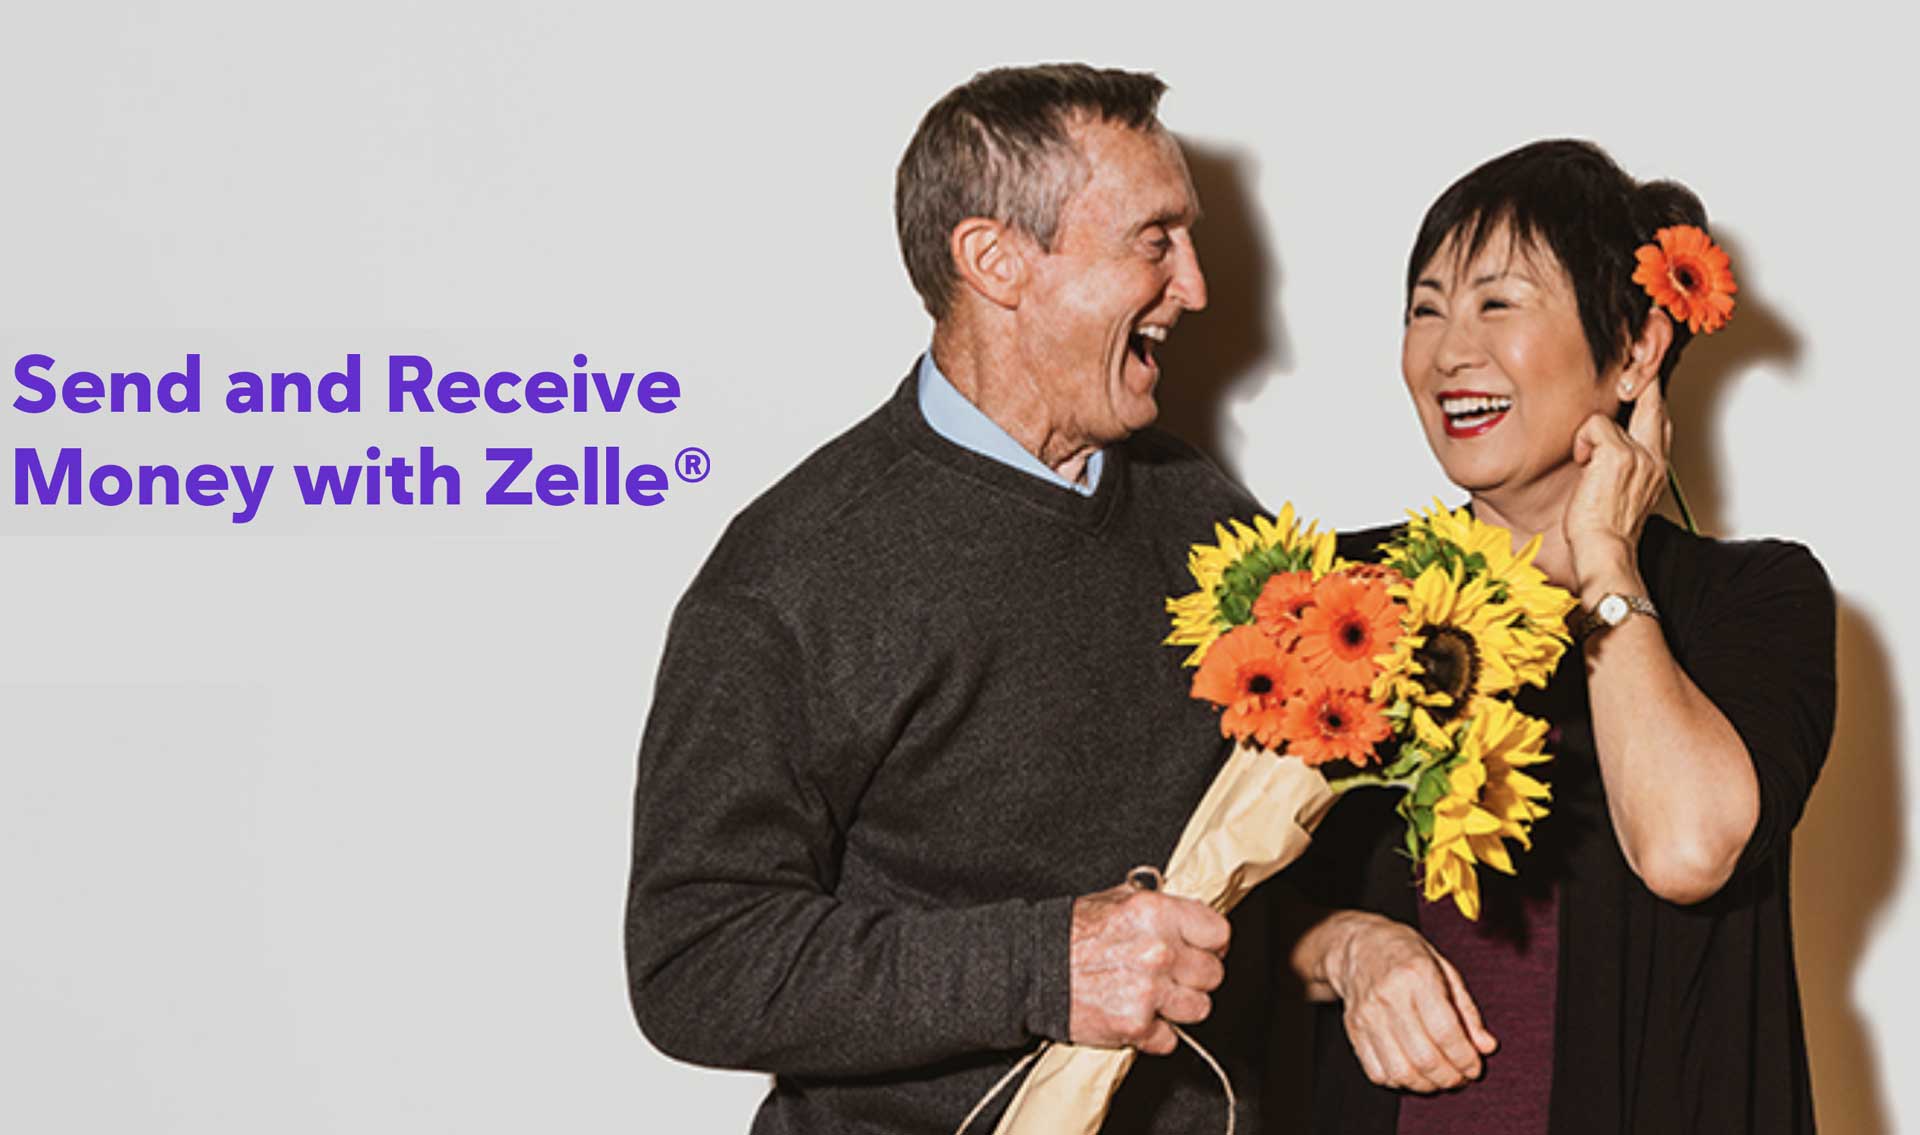 You can send money with Zelle